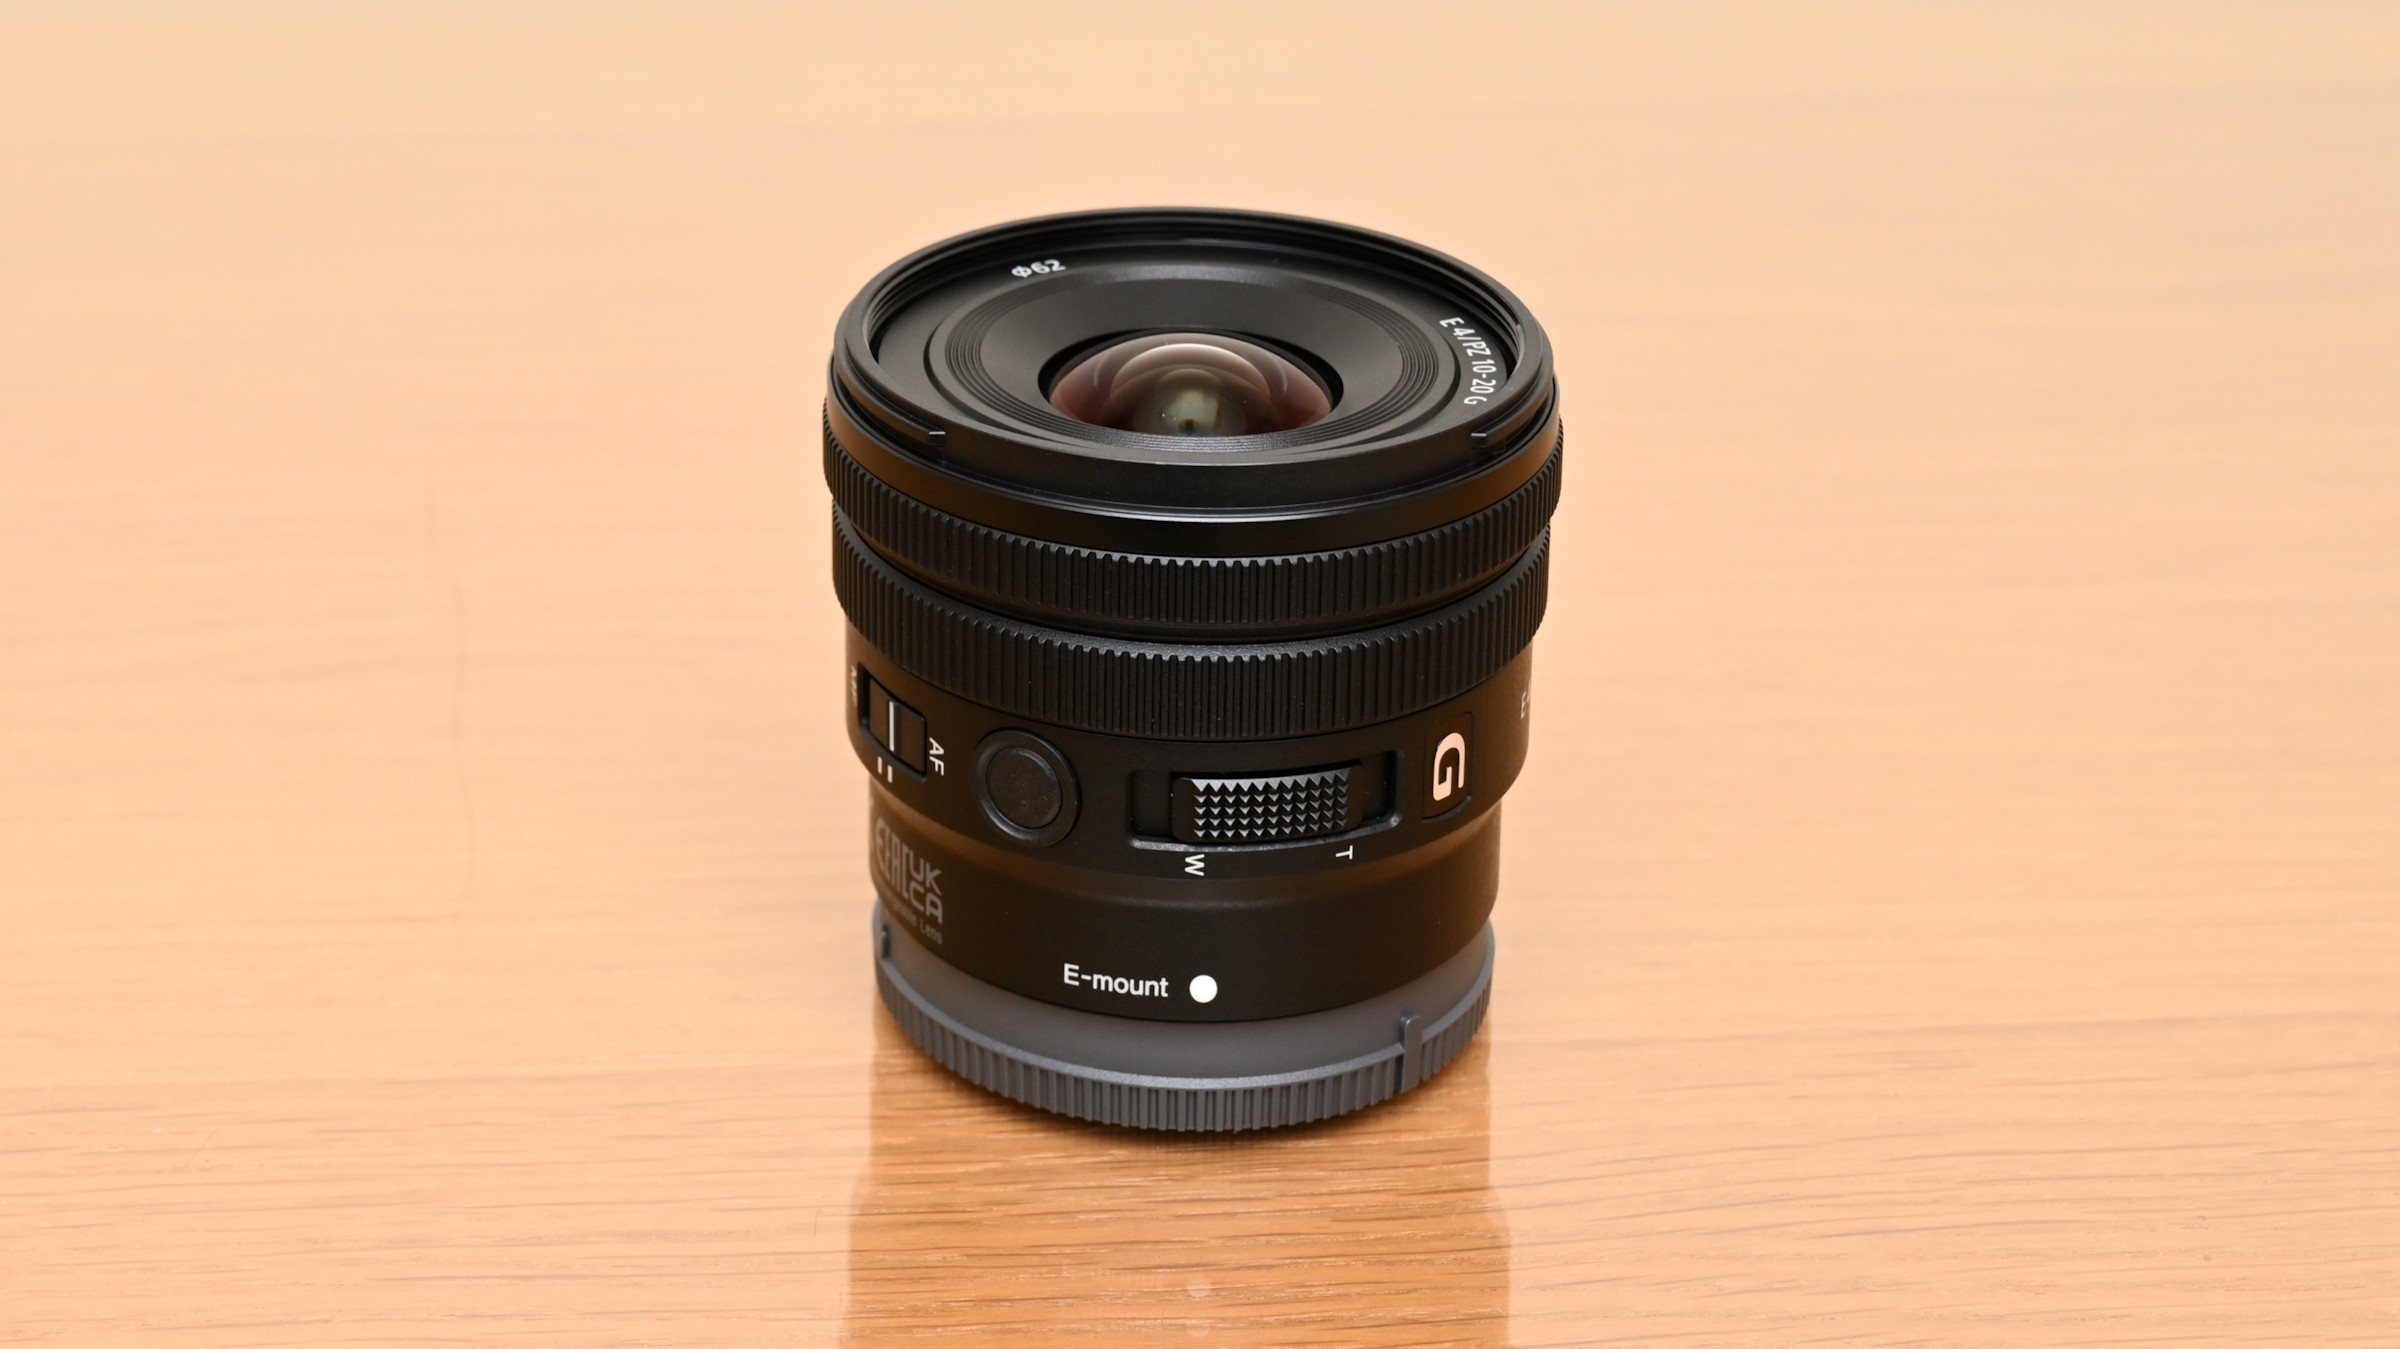 Best lenses for Sony A6400: Sony E PZ 10-20mm F4 G